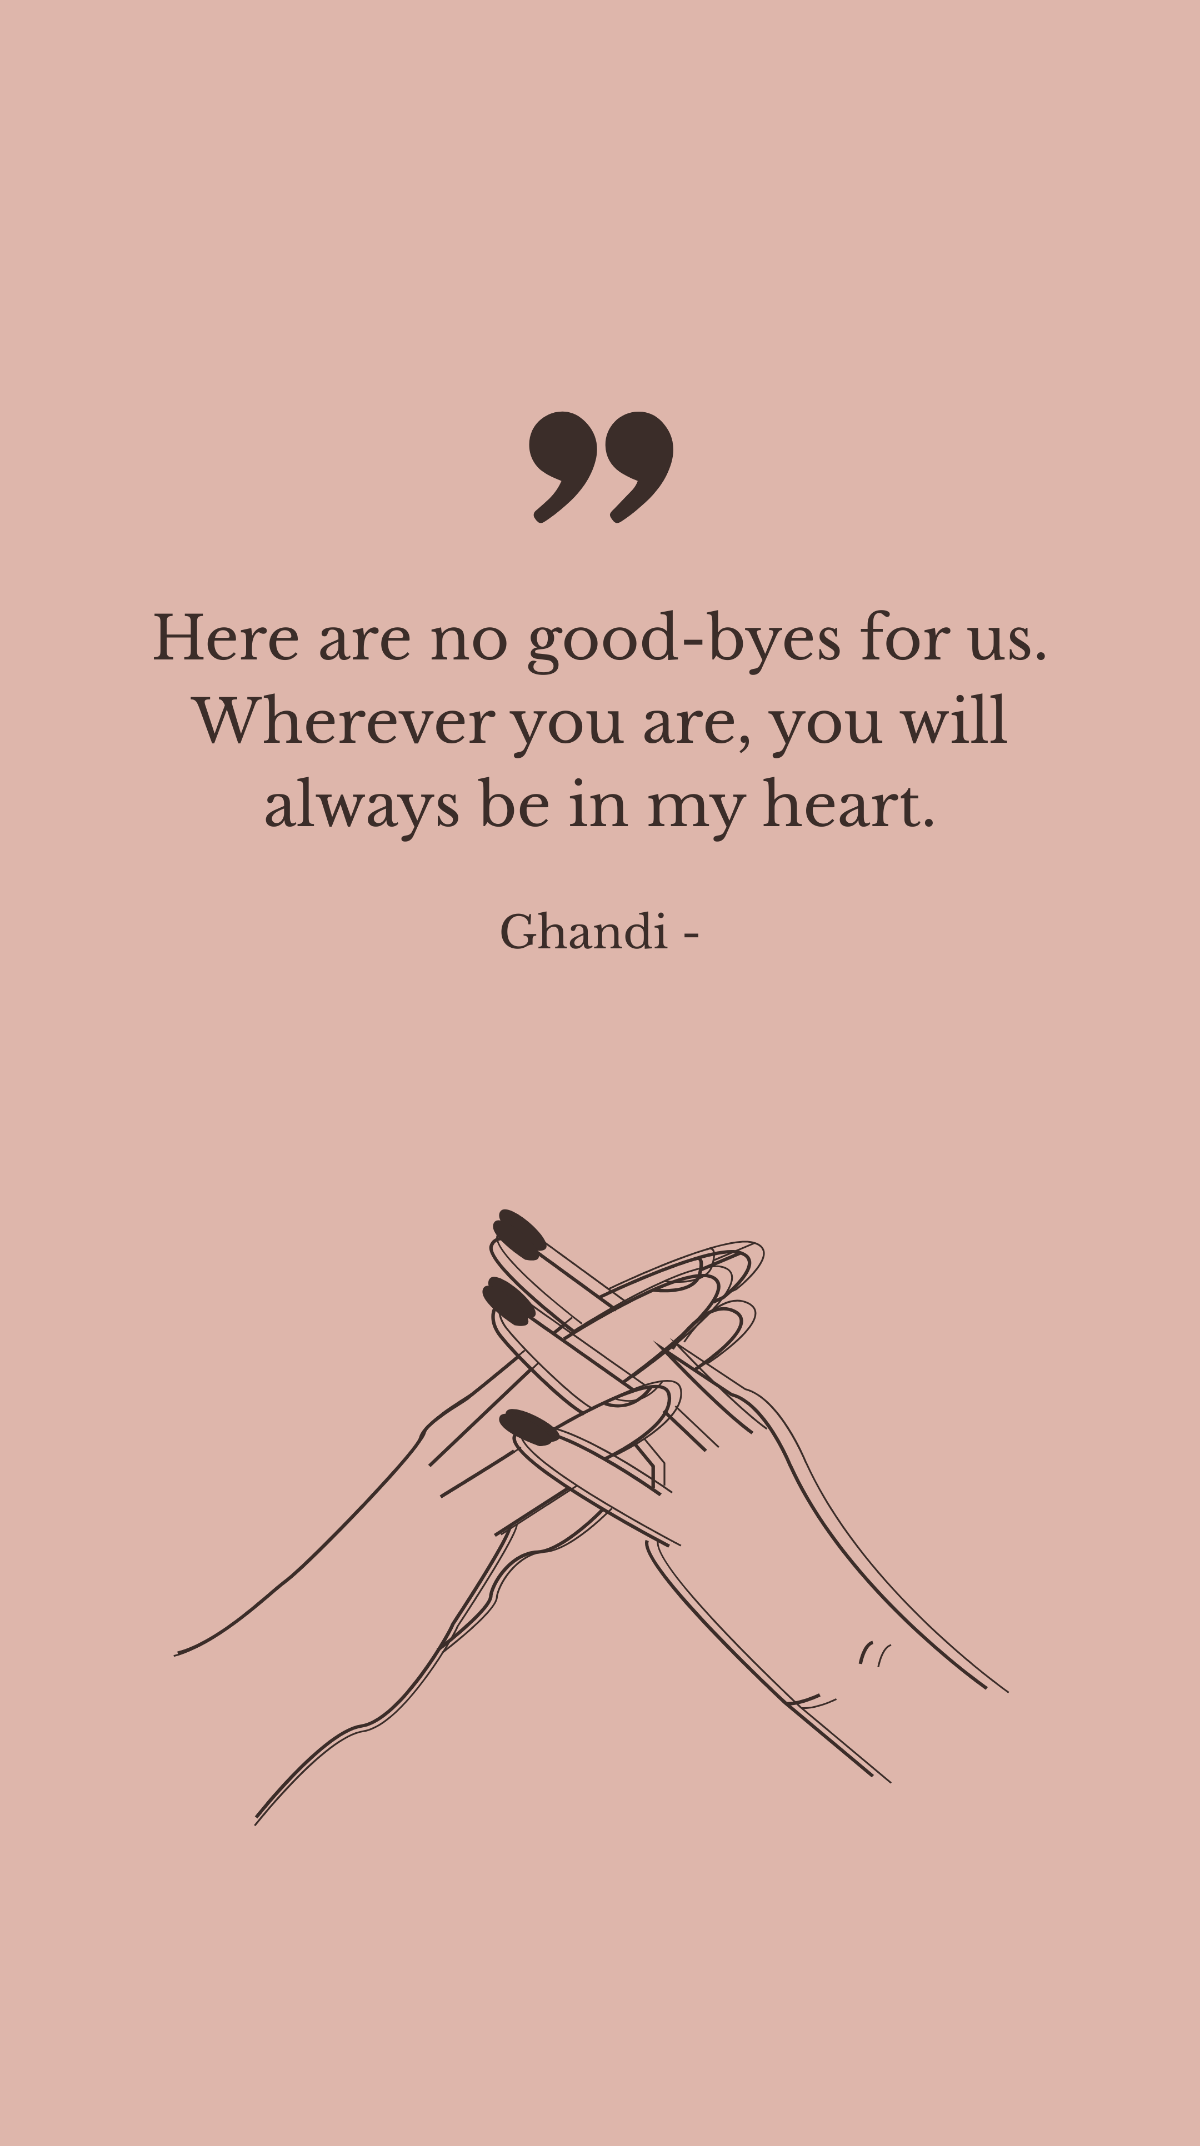 Ghandi - Here are no good-byes for us. Wherever you are, you will always be in my heart. Template